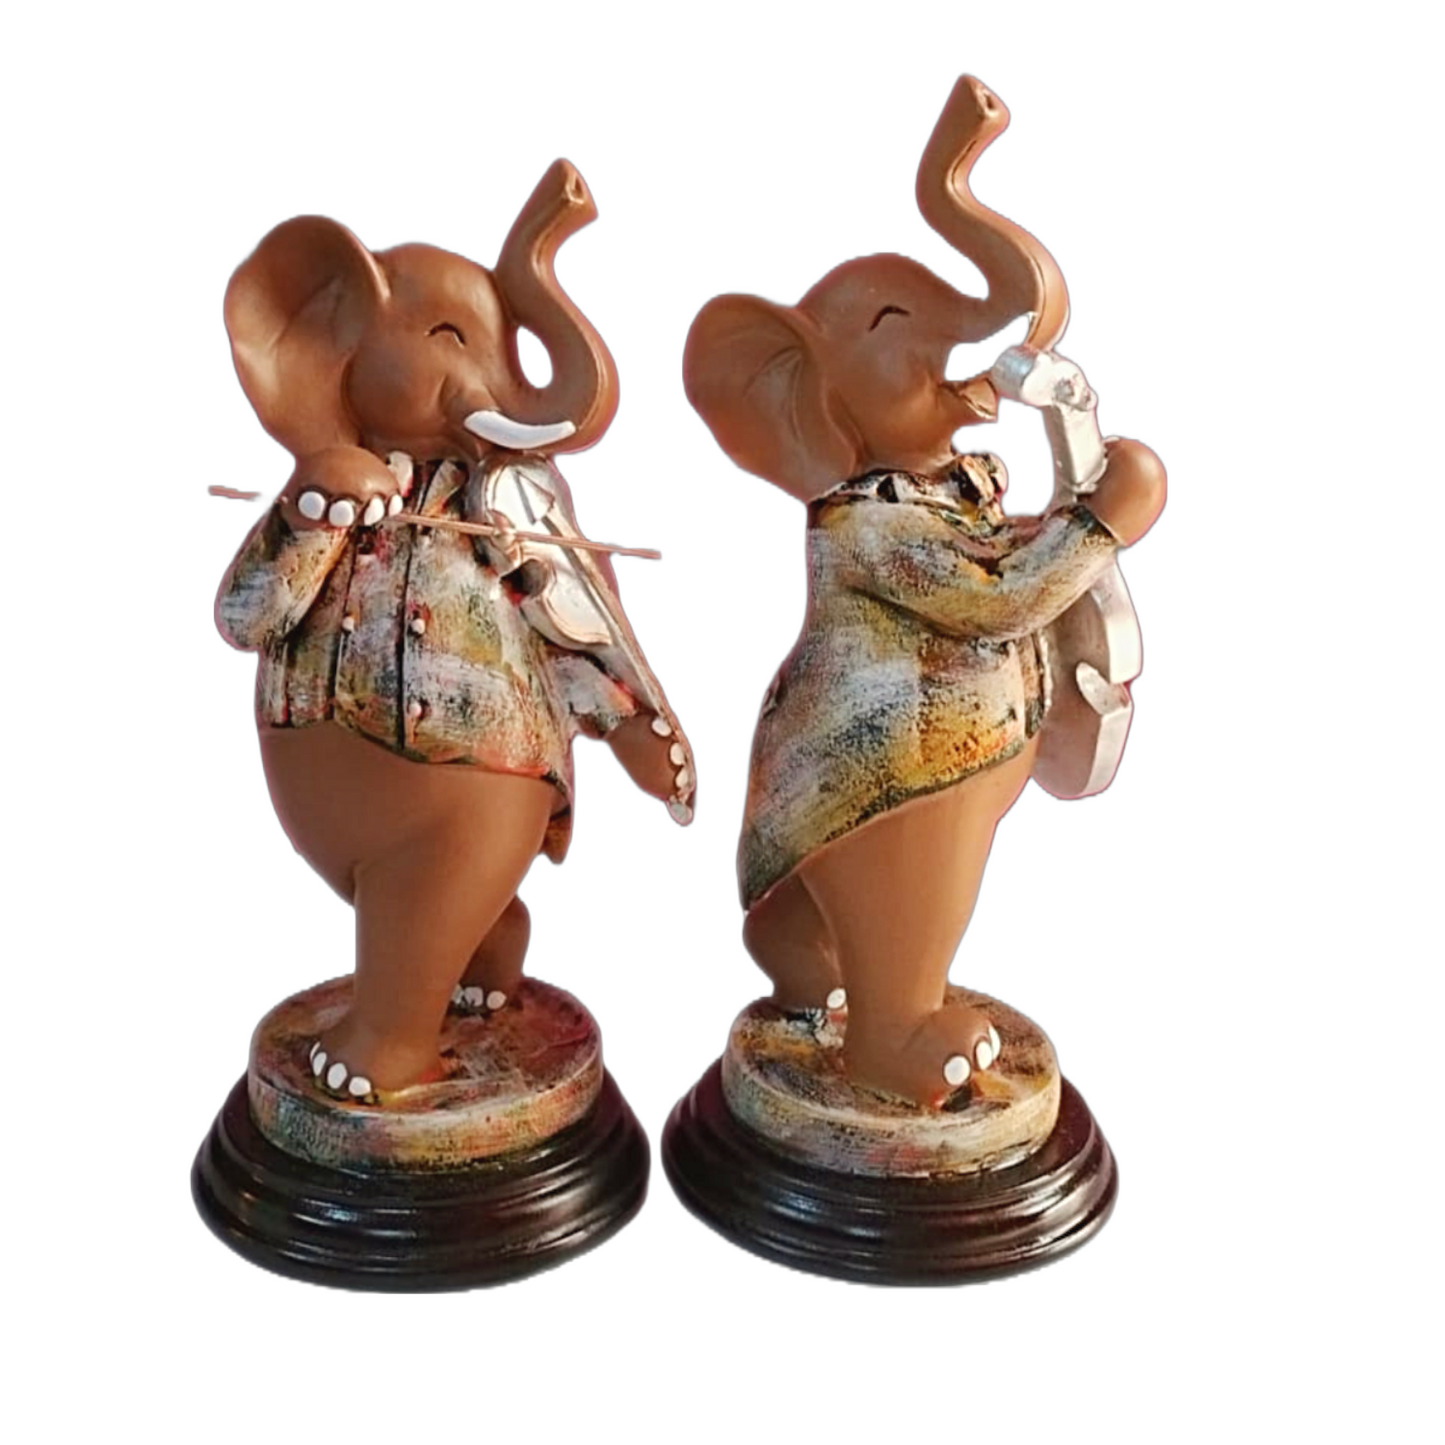 Statue ALiLA Elephants Statue Showpiece Idol for Gifting & Home Table Decoration Vastu Lucky, Set of 2 Brown, 10 Inches Height Statue